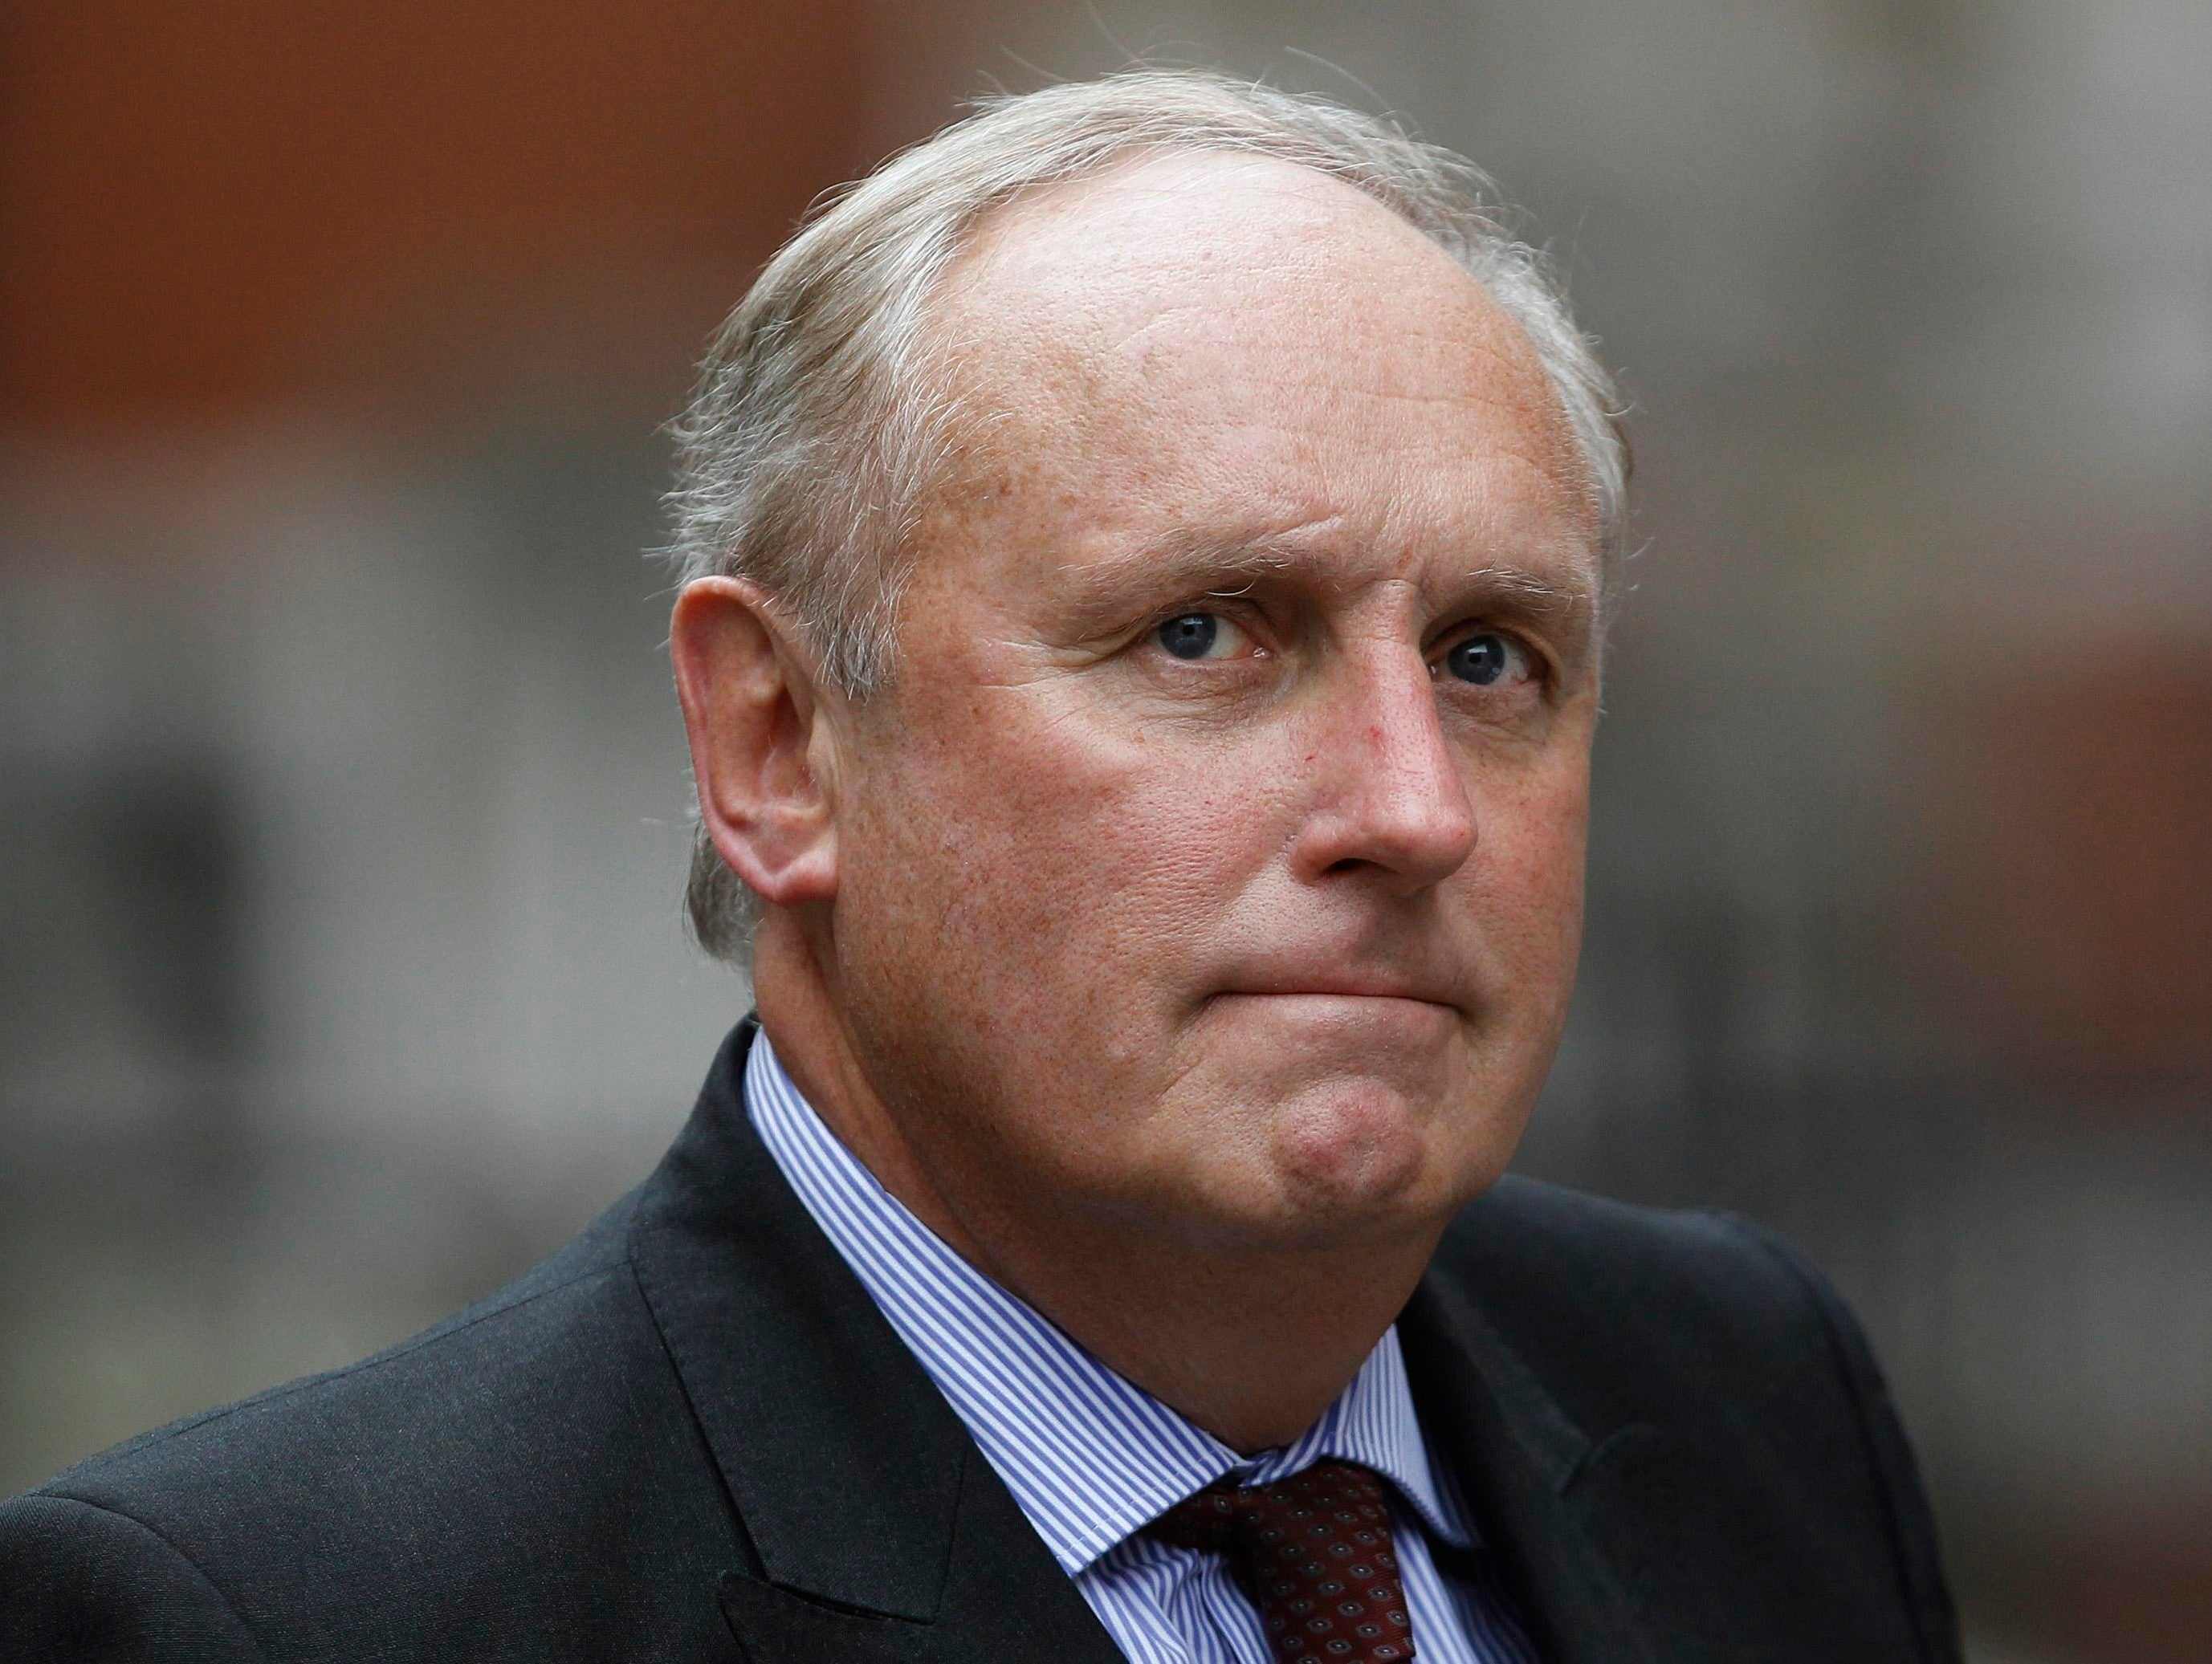 COMMENT: 'Paul Dacre triumphed by recognising online growth should not come at expense of the newspaper'